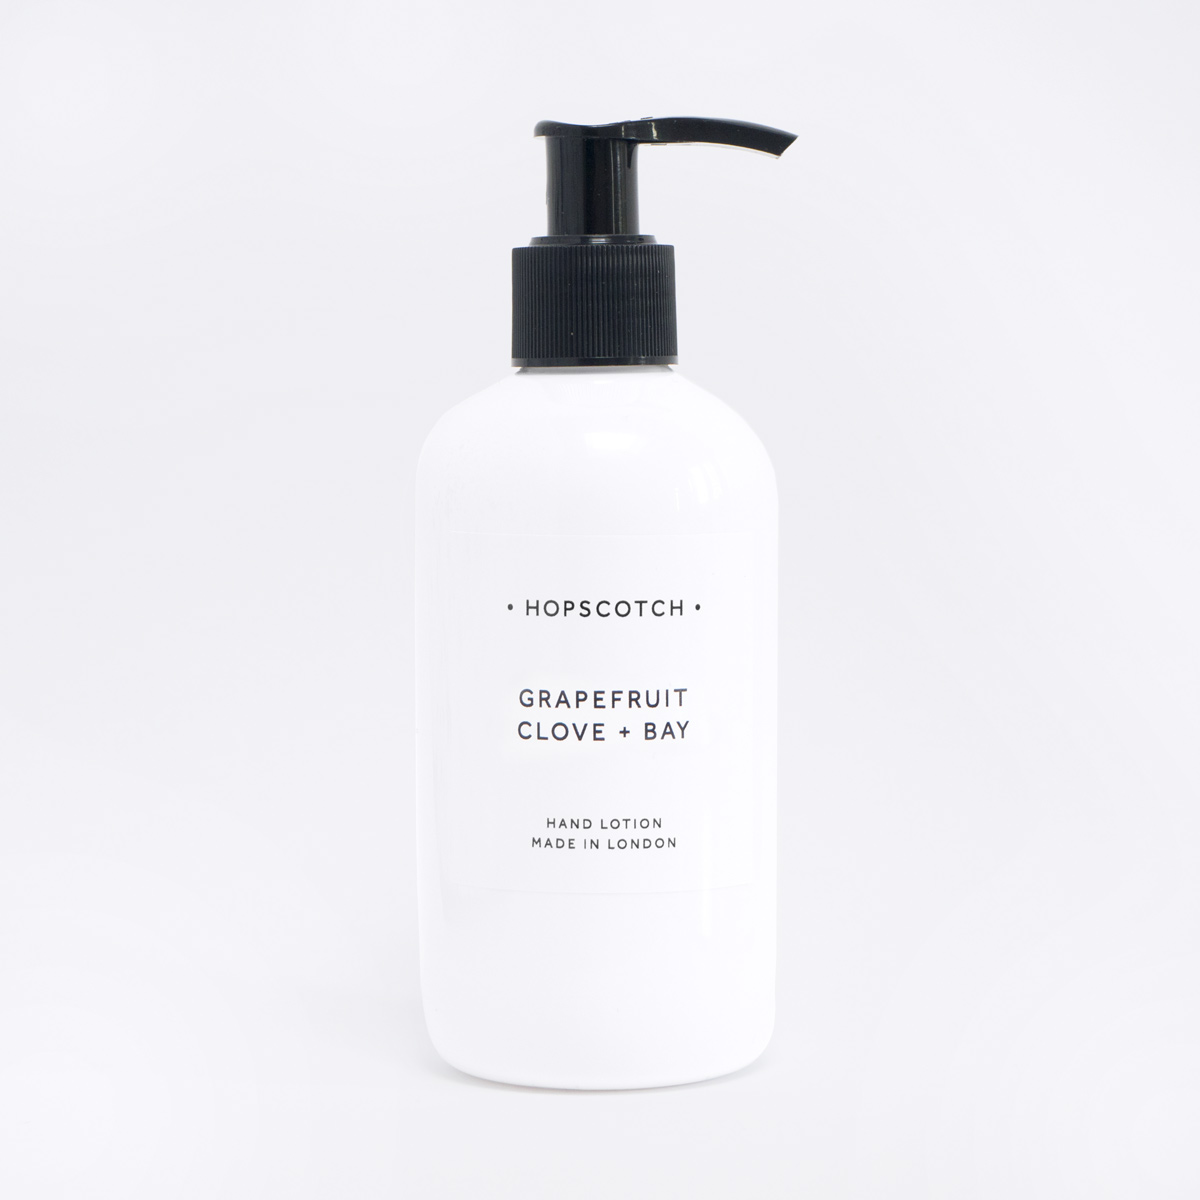 grapefruit, clove and bay hand lotion